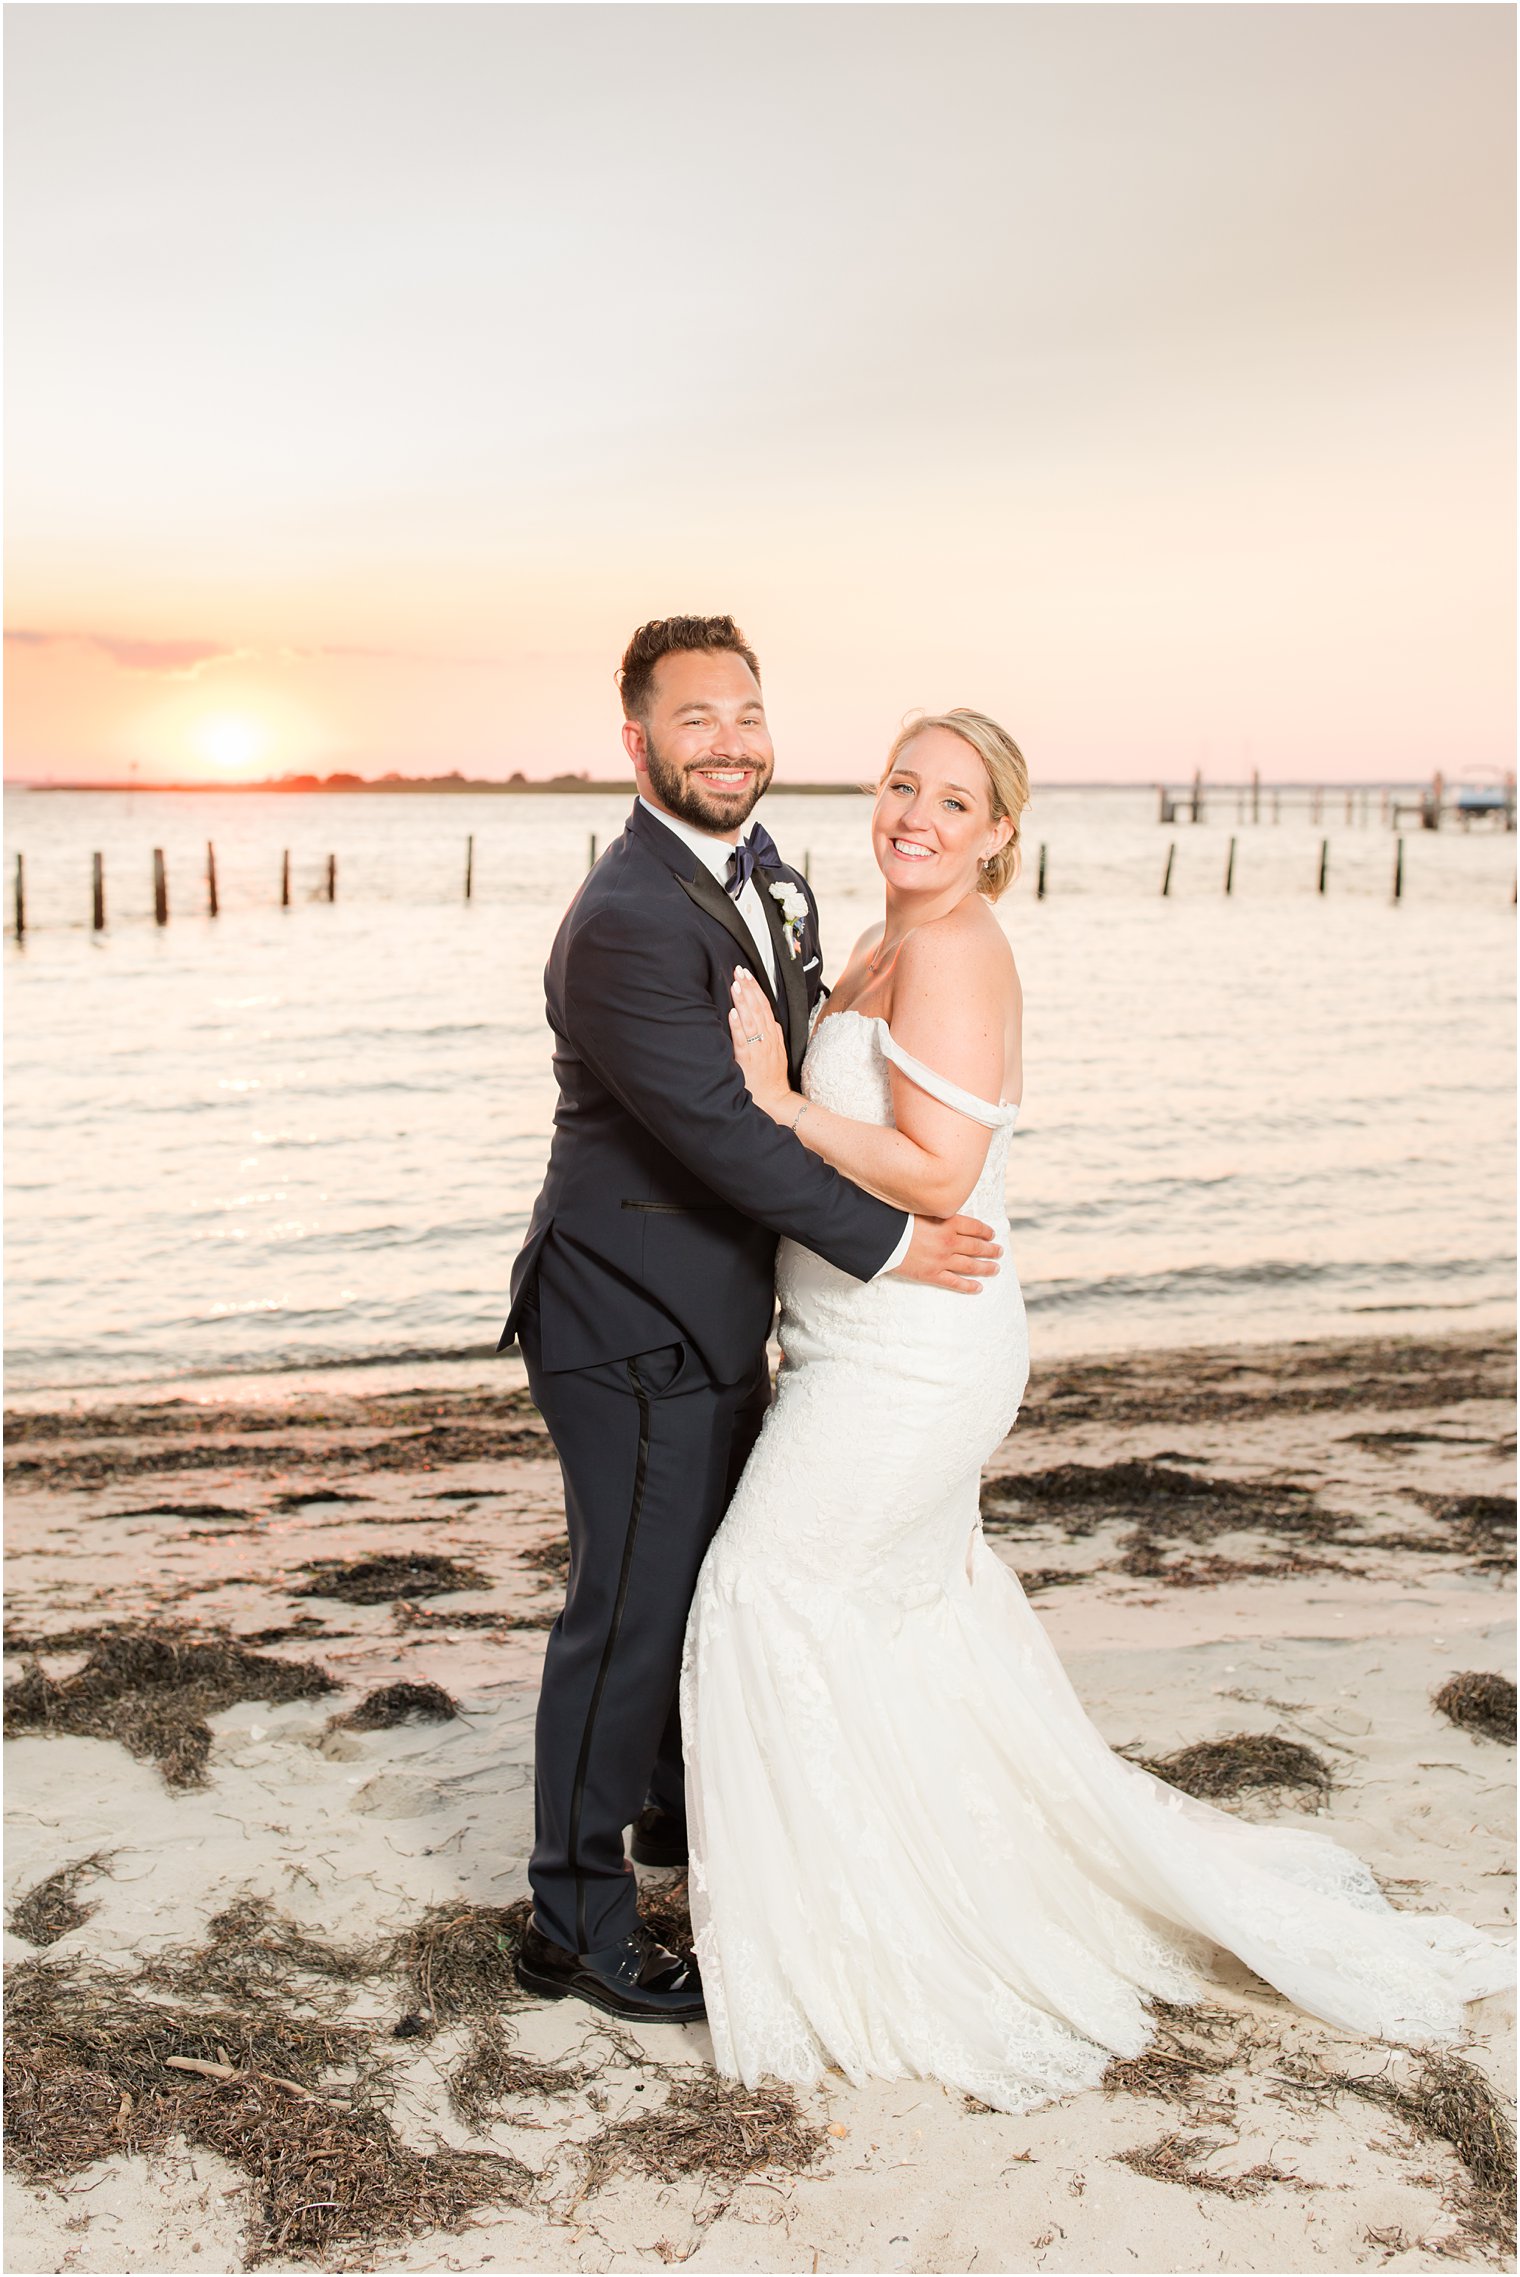 bride and groom pose on beach at sunset on wedding day